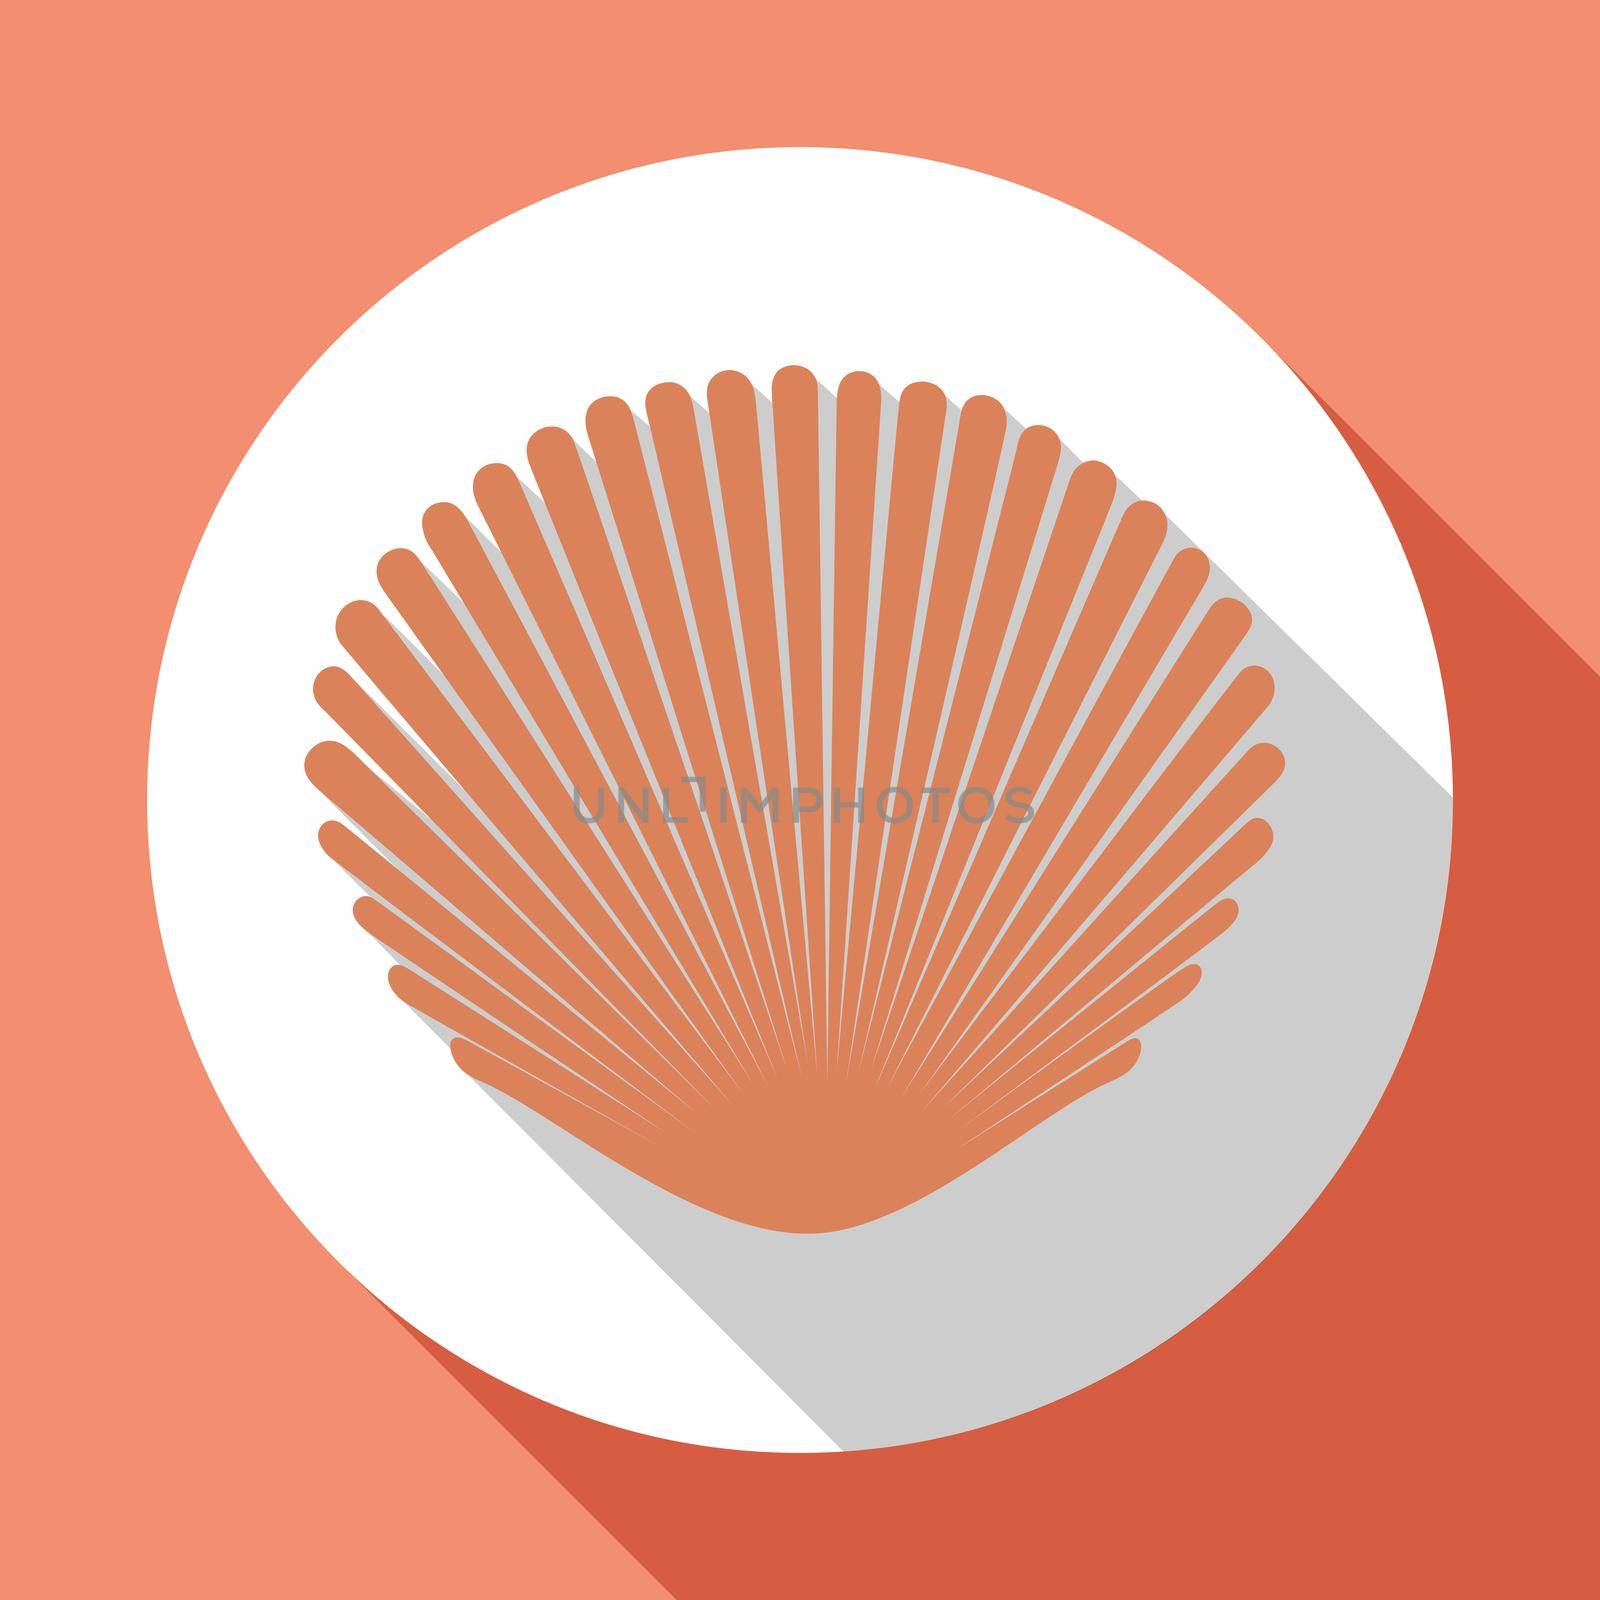 Seashell flat icon with long shadow. Flat design style. Raster version.